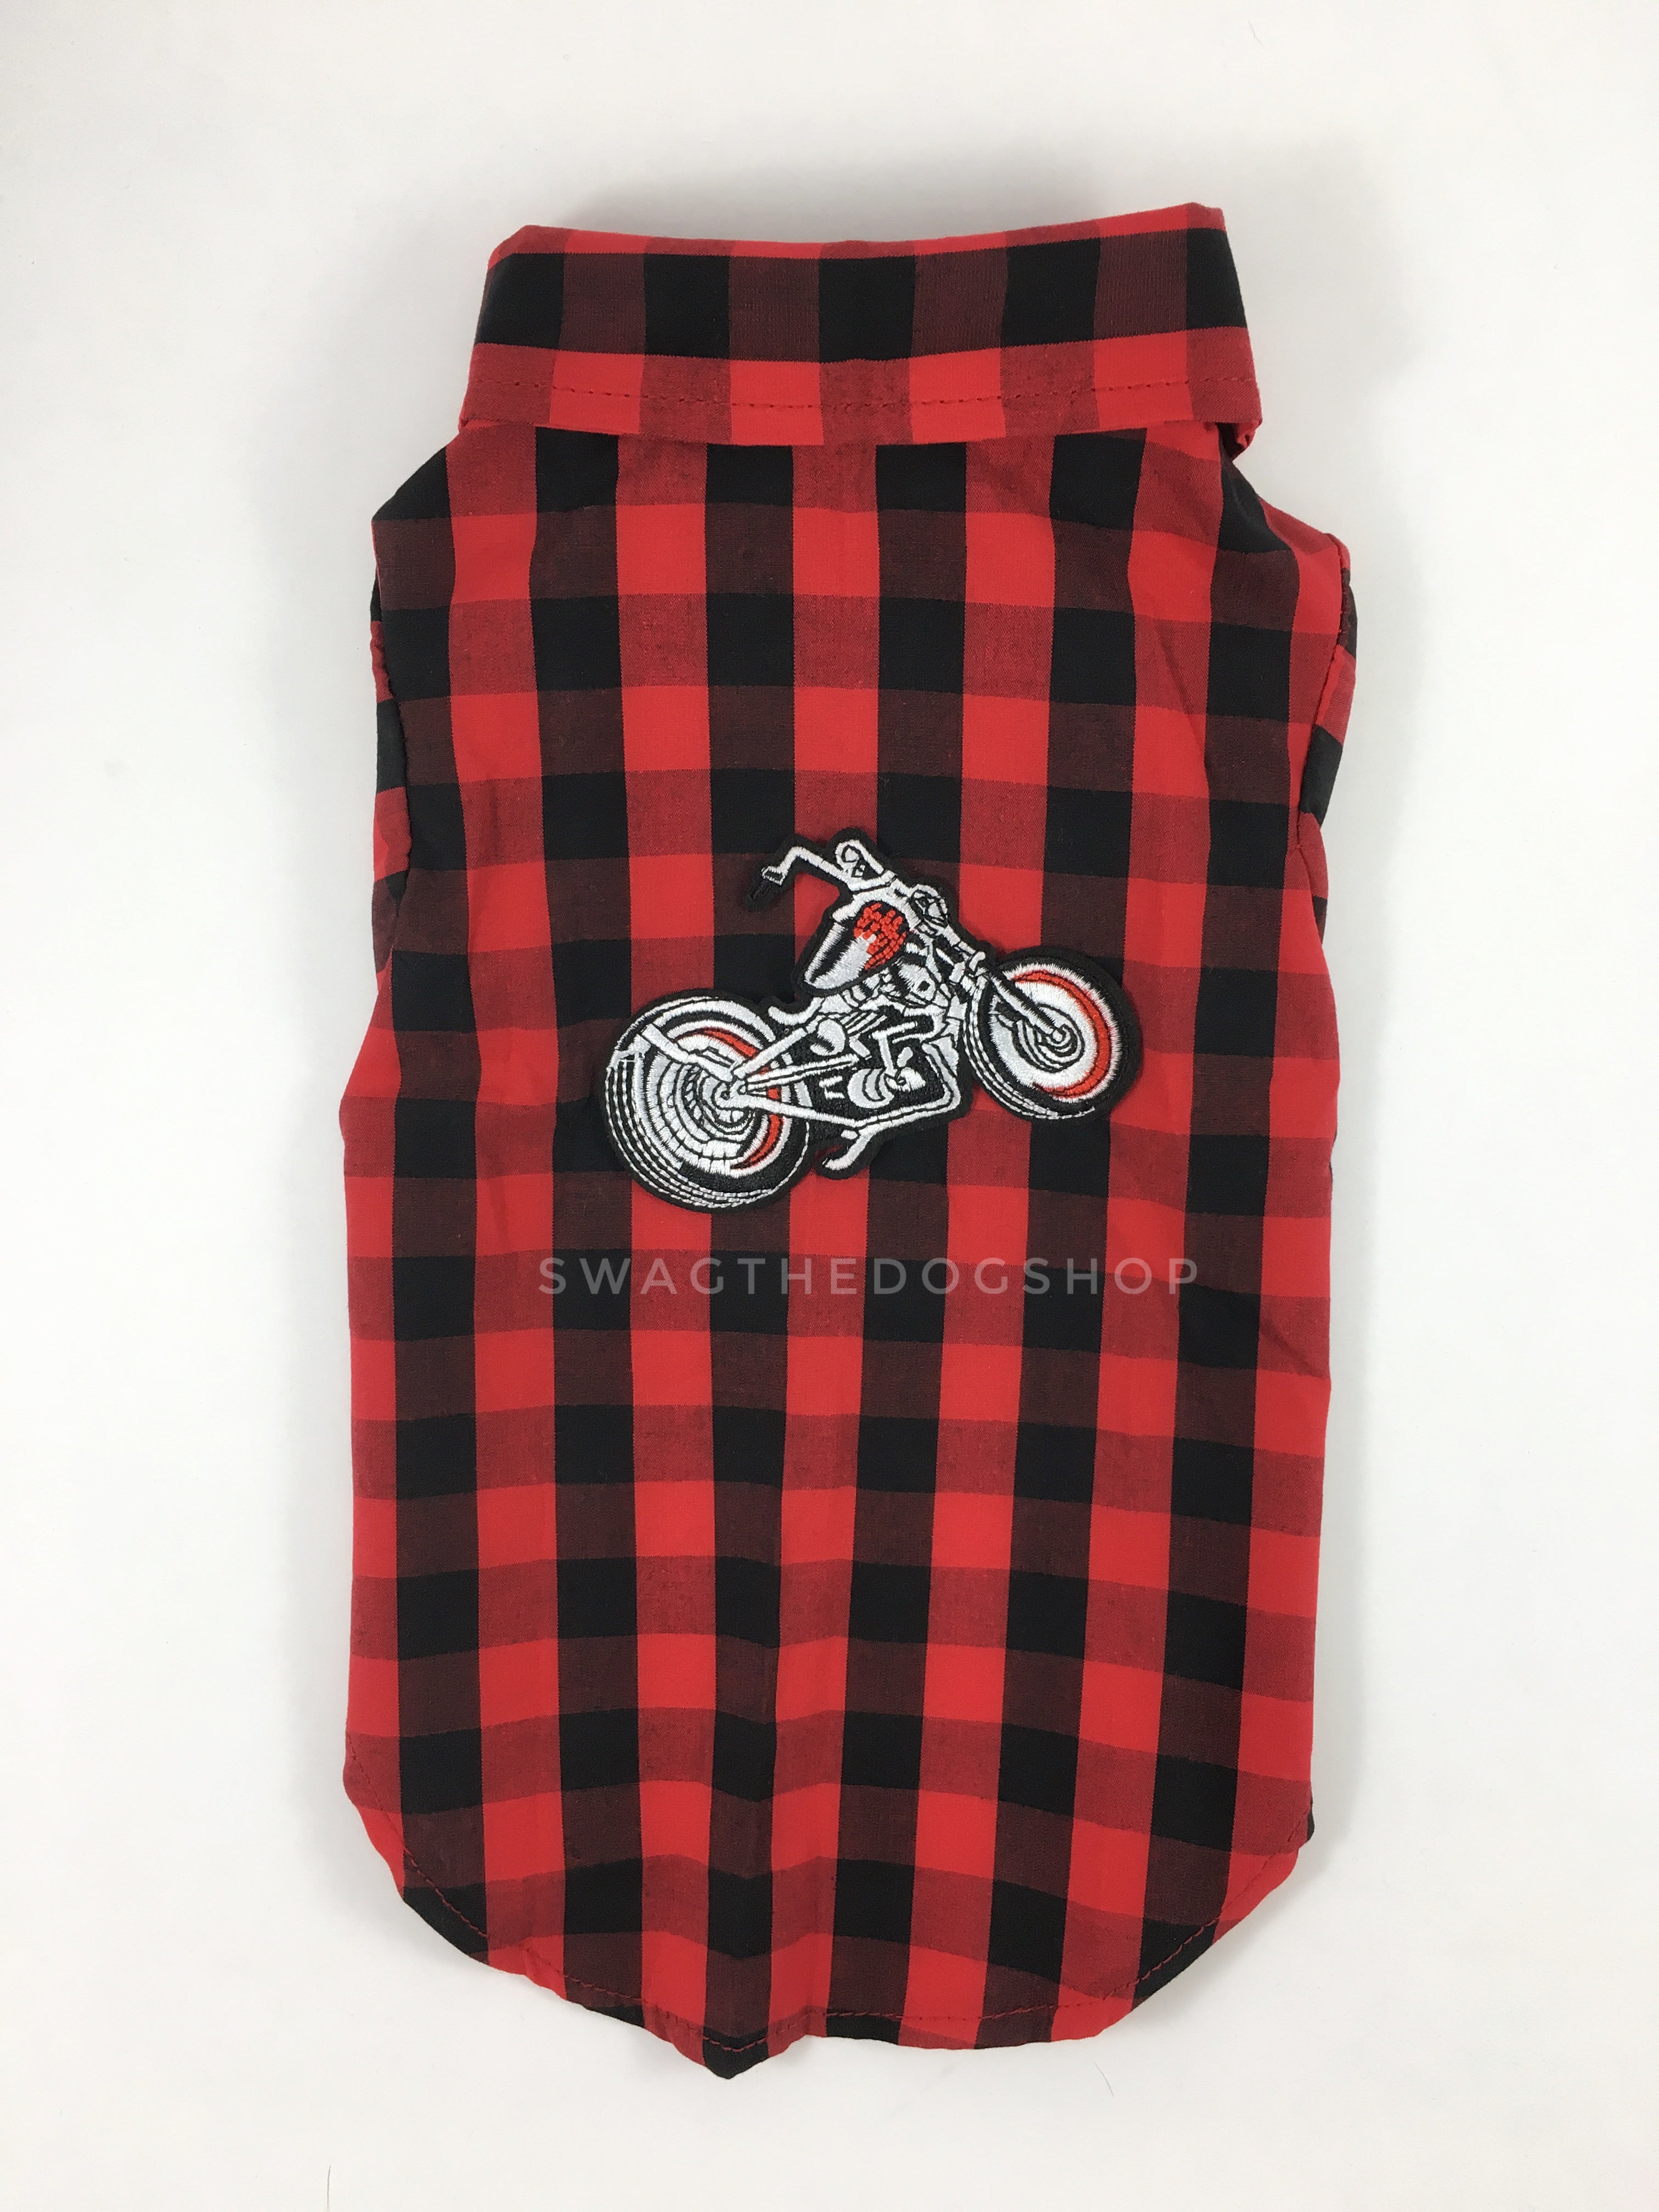 Kenora Summer Shirt - Patch Option of Motorcycle on the Back. Black and Red Gingham Shirt